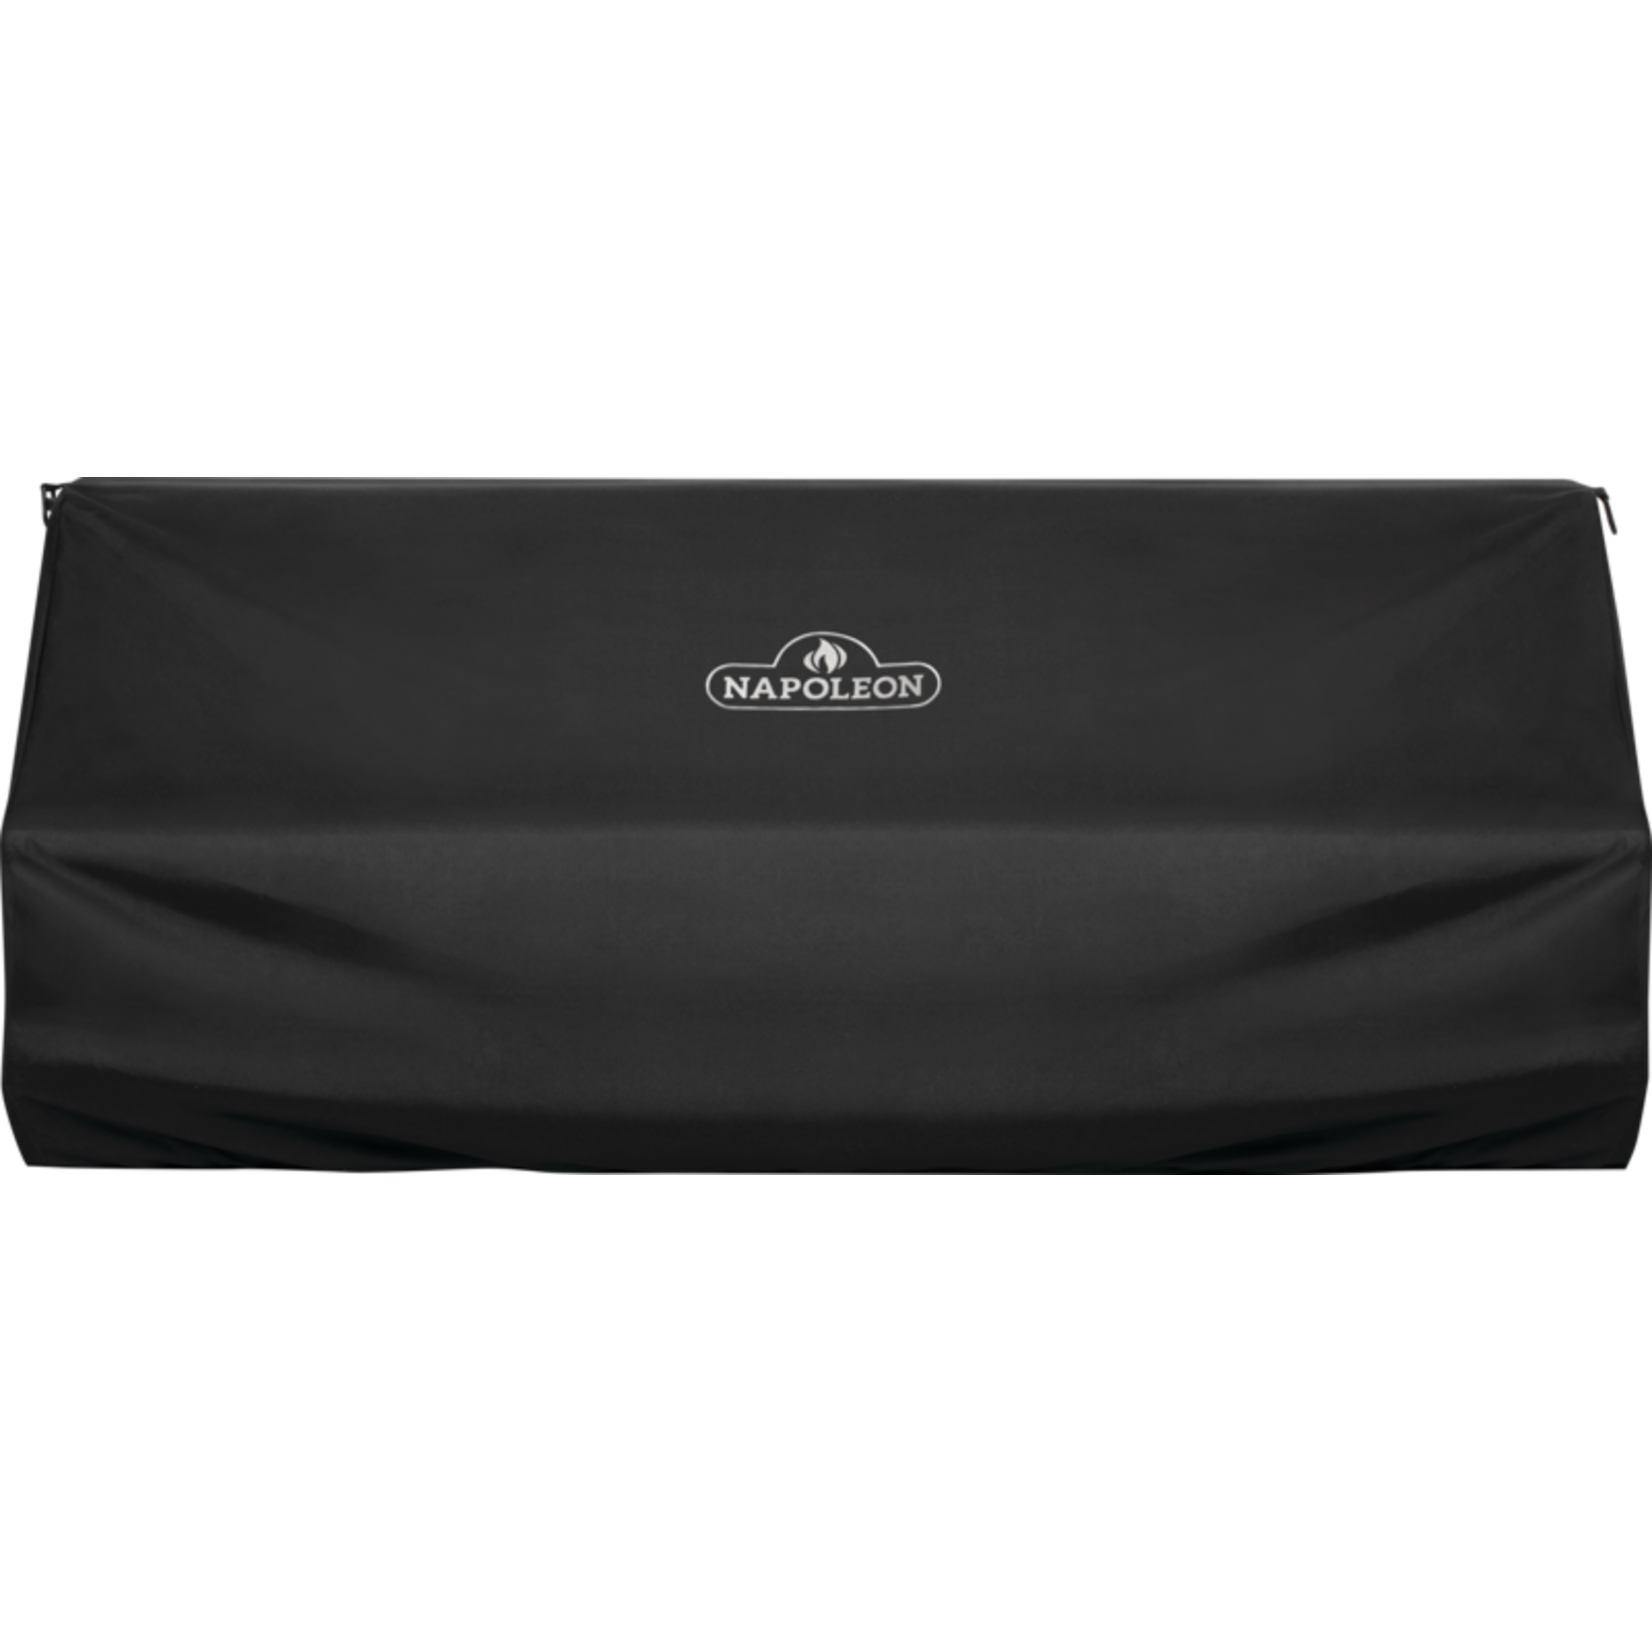 Napoleon PRO 825 Built-in Grill Cover